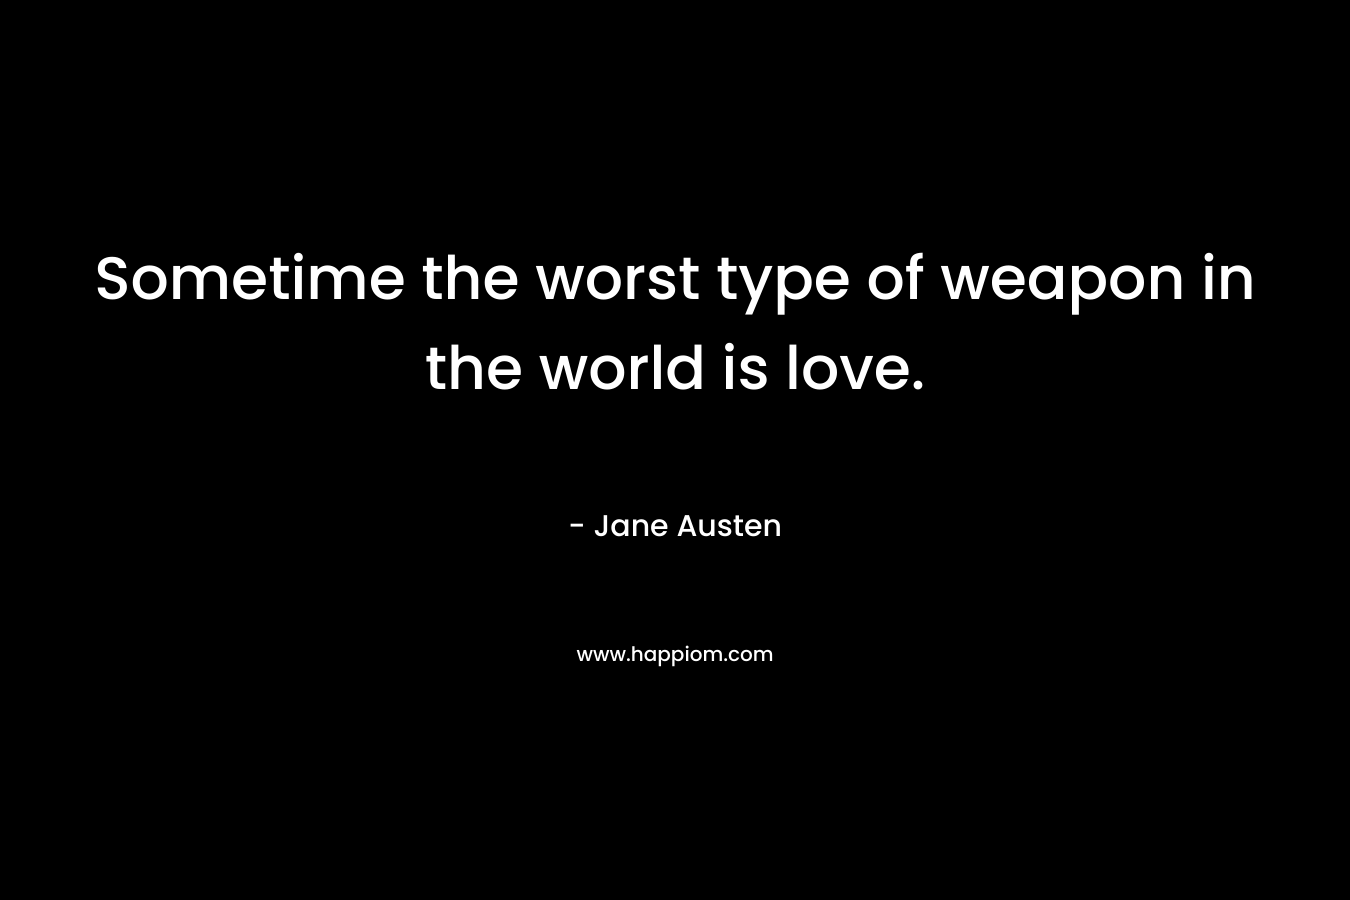 Sometime the worst type of weapon in the world is love. – Jane Austen